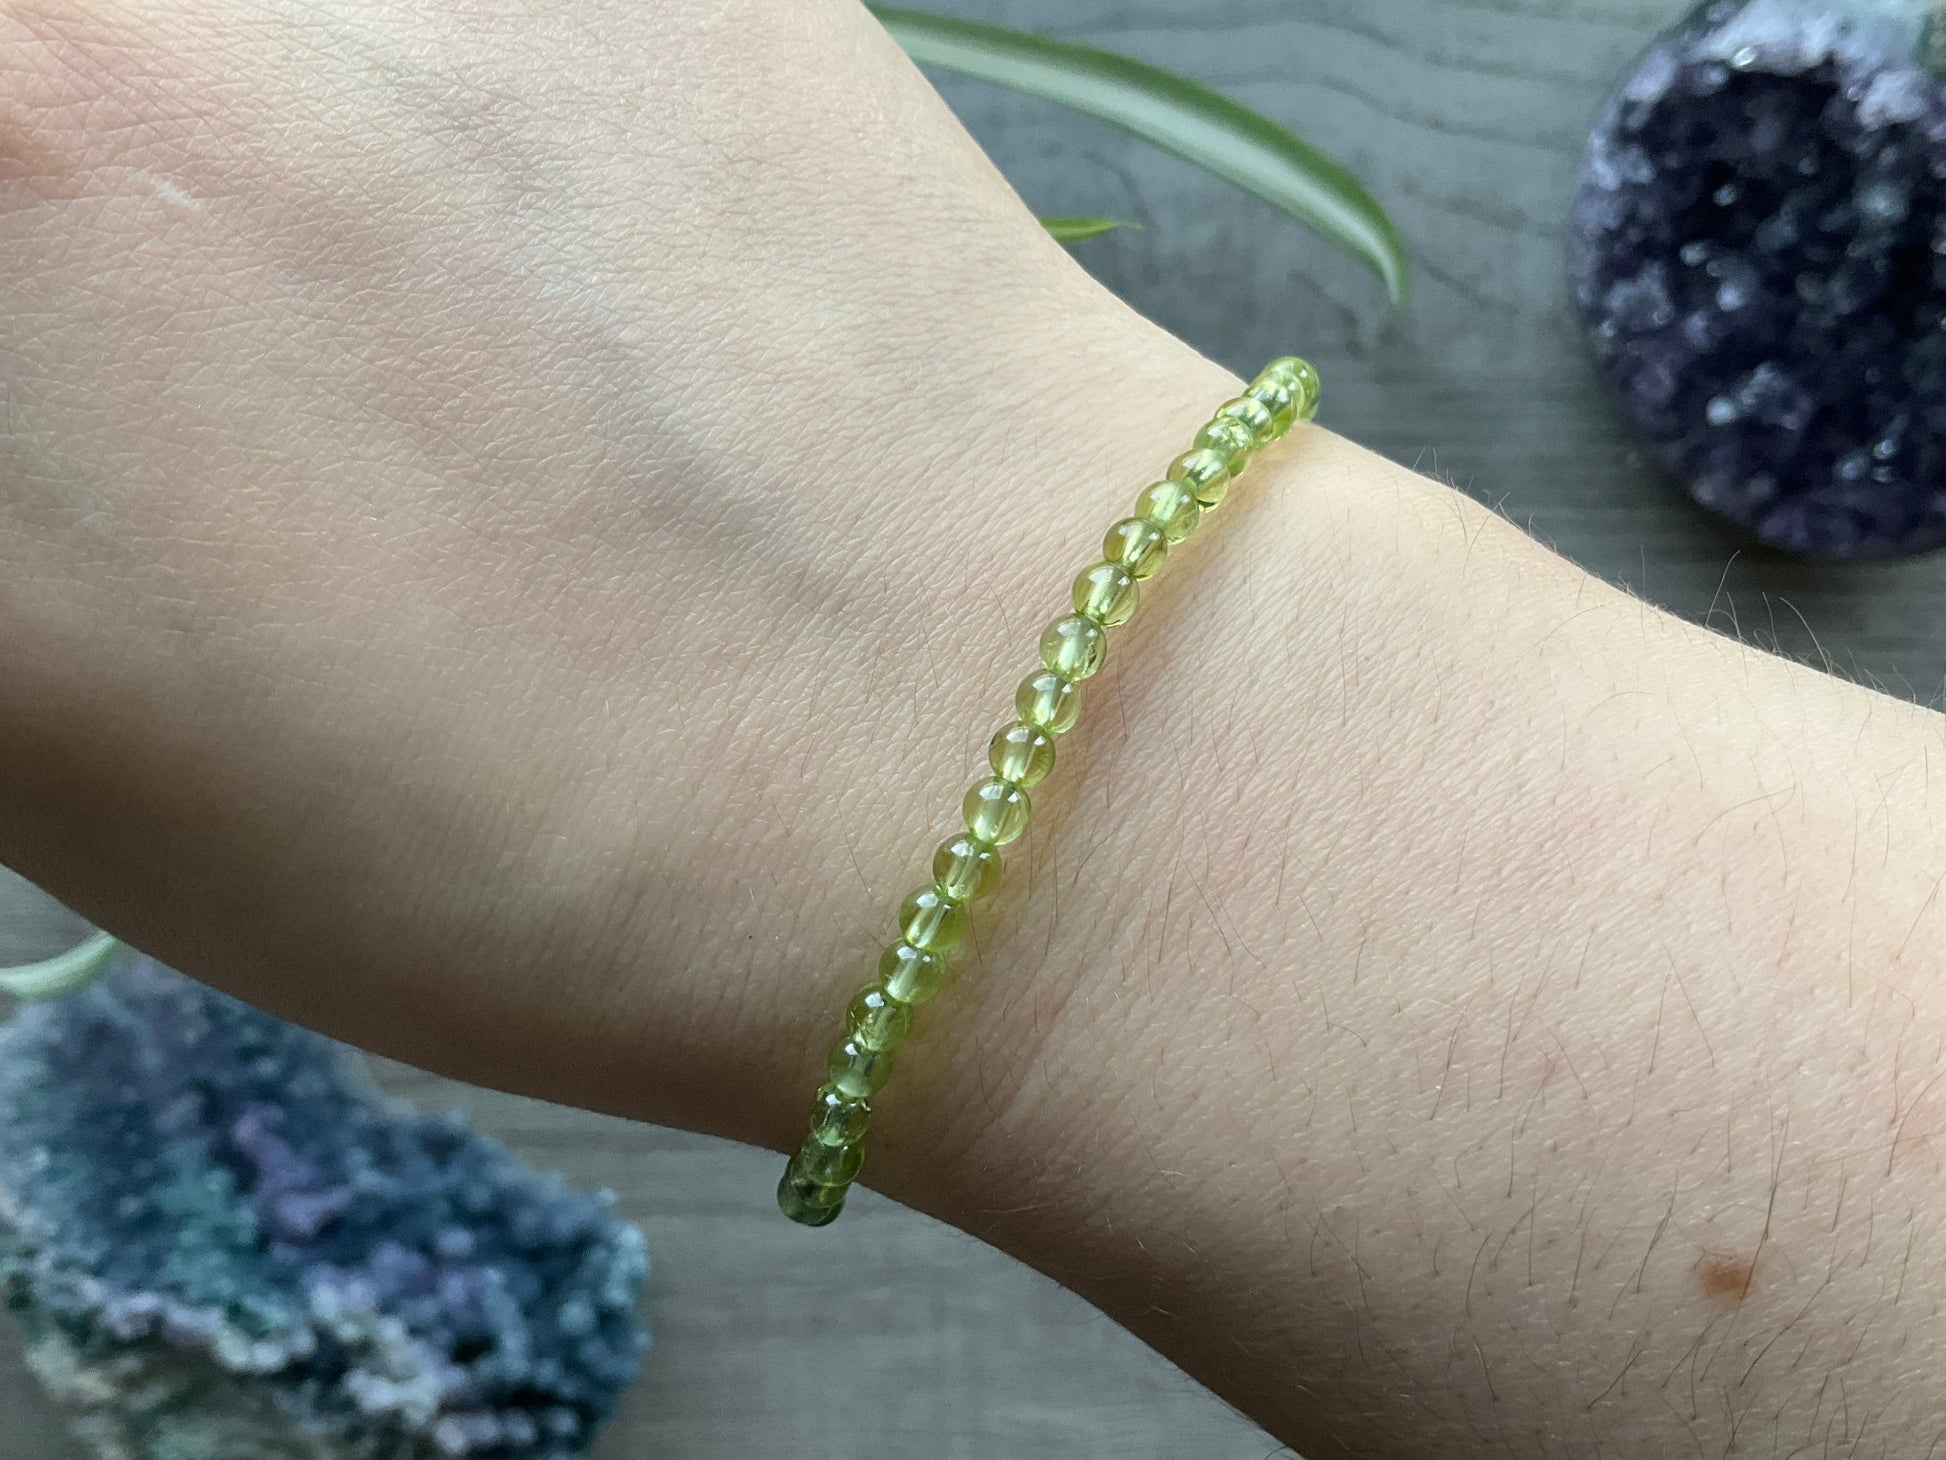 Pictured is a peridot bead bracelet.